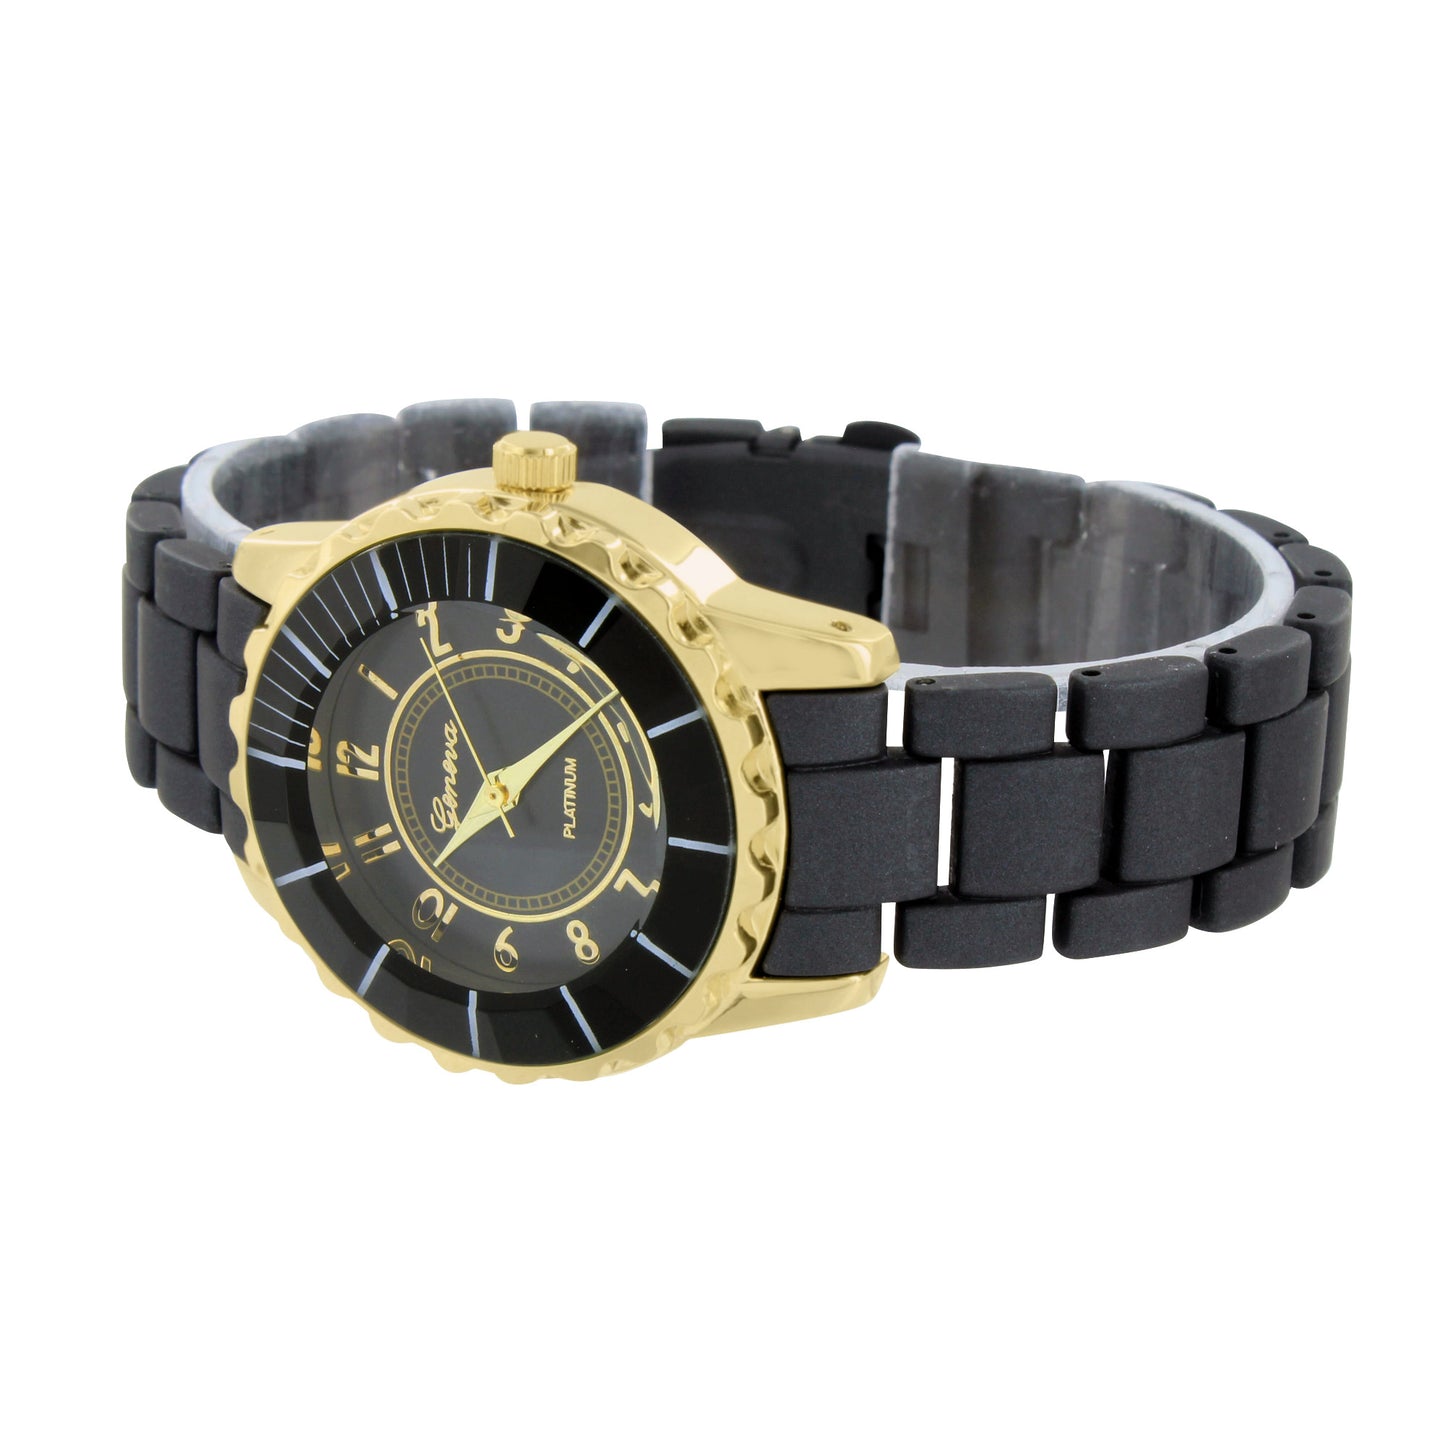 Unique Ladies Gold Tone Black Band New Watch Round Face